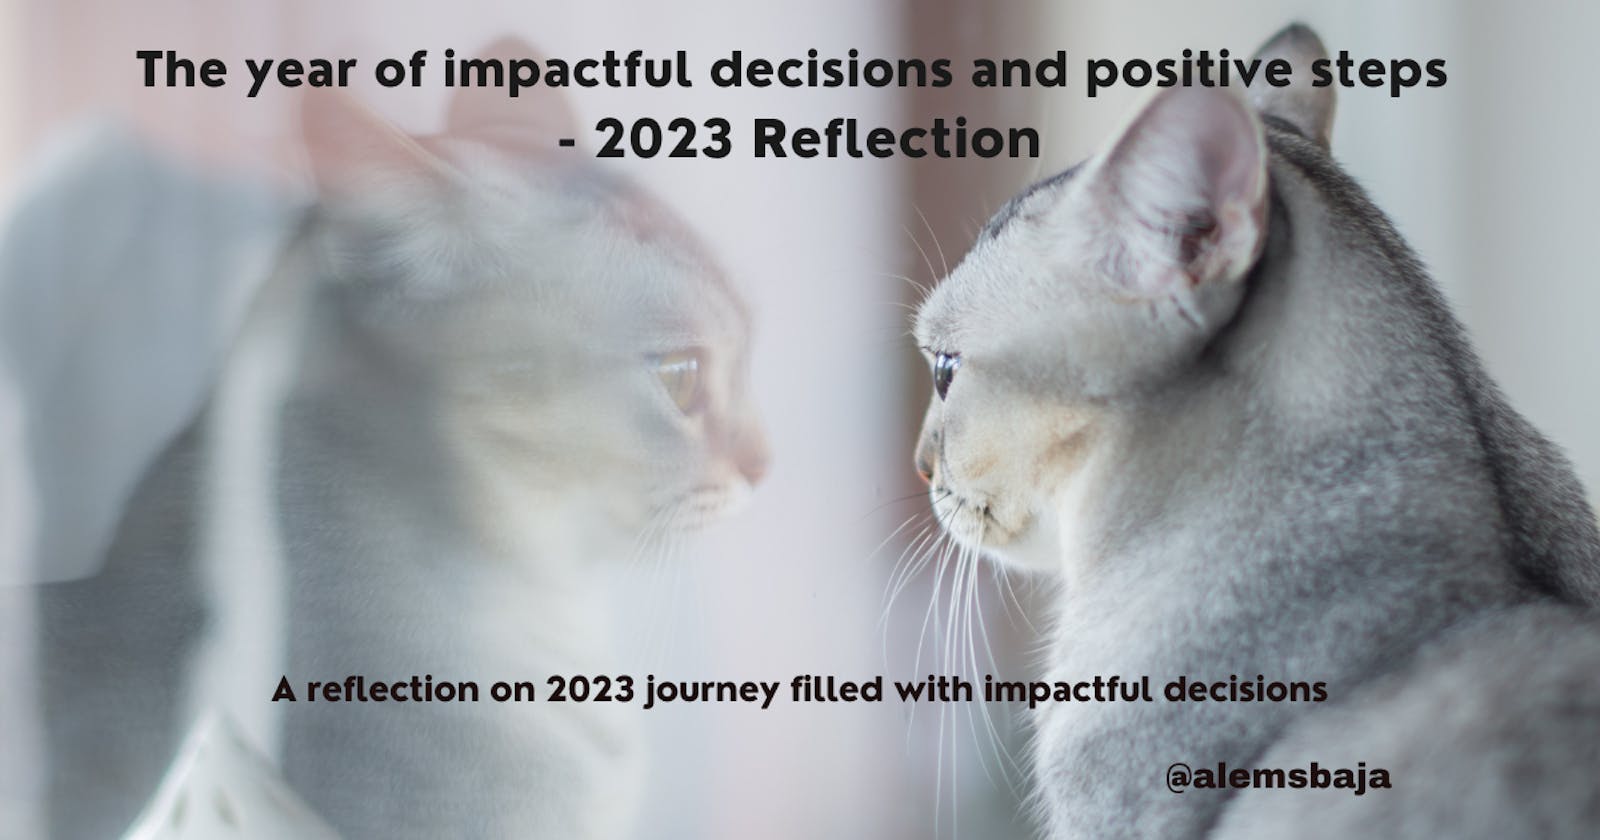 The year of impactful decisions and positive steps - 2023 Reflection